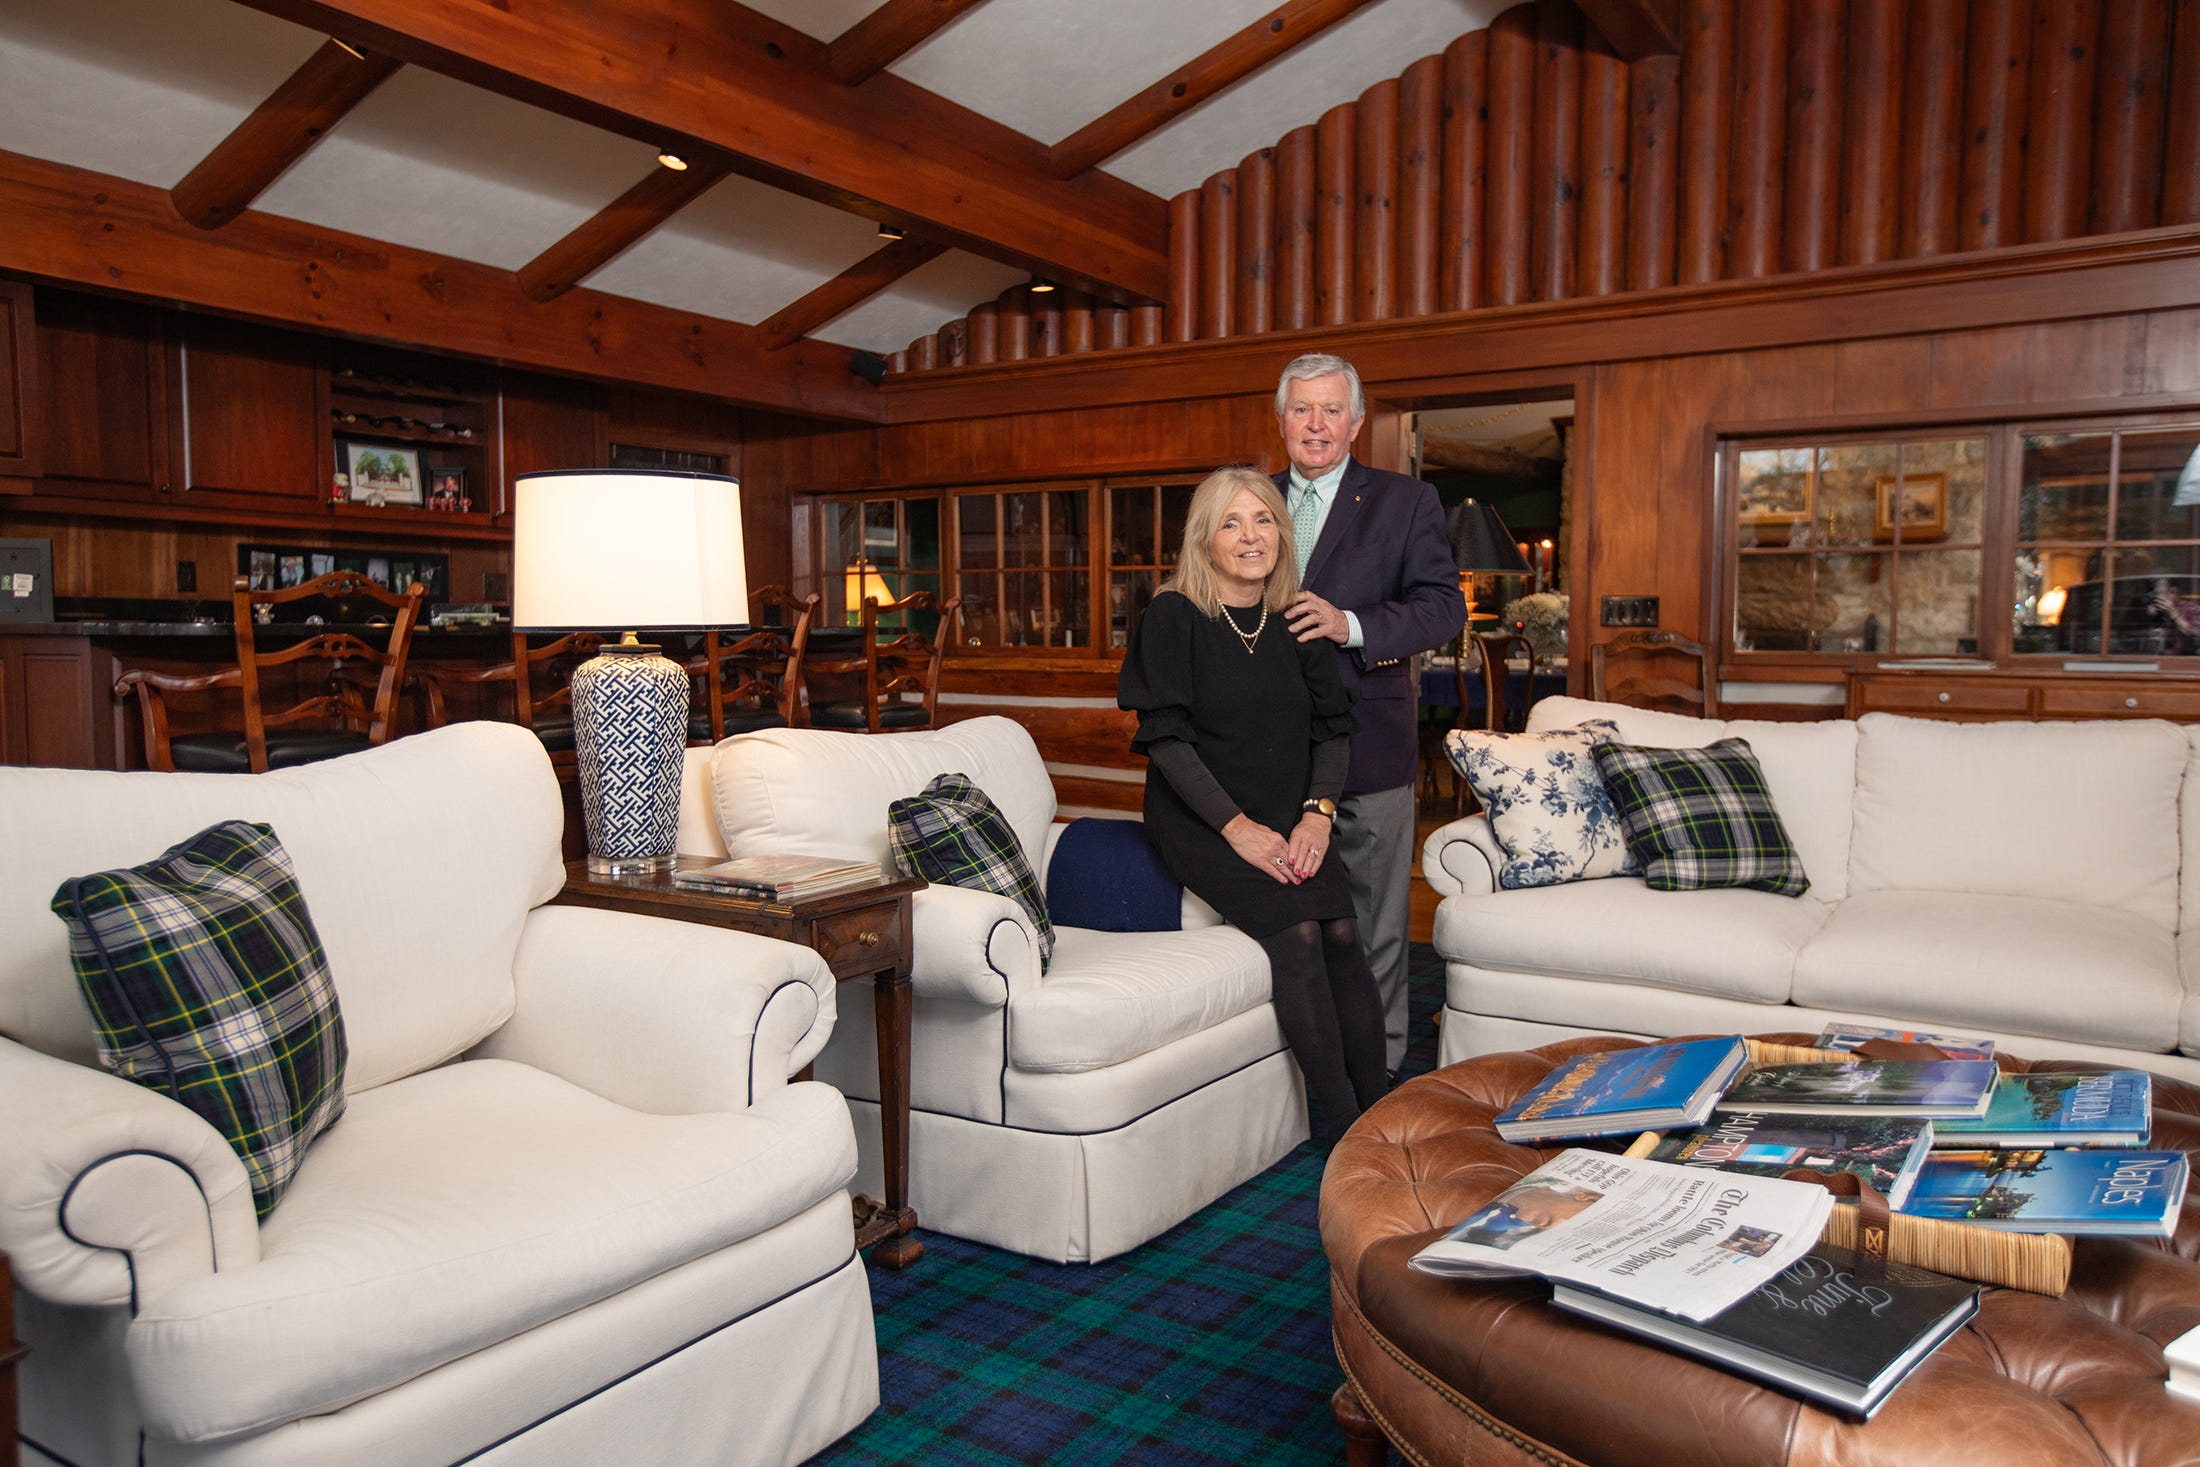 Donnette and Tom Calhoon in the River Room, a space they renovated in 2004 within their Norwich Township home